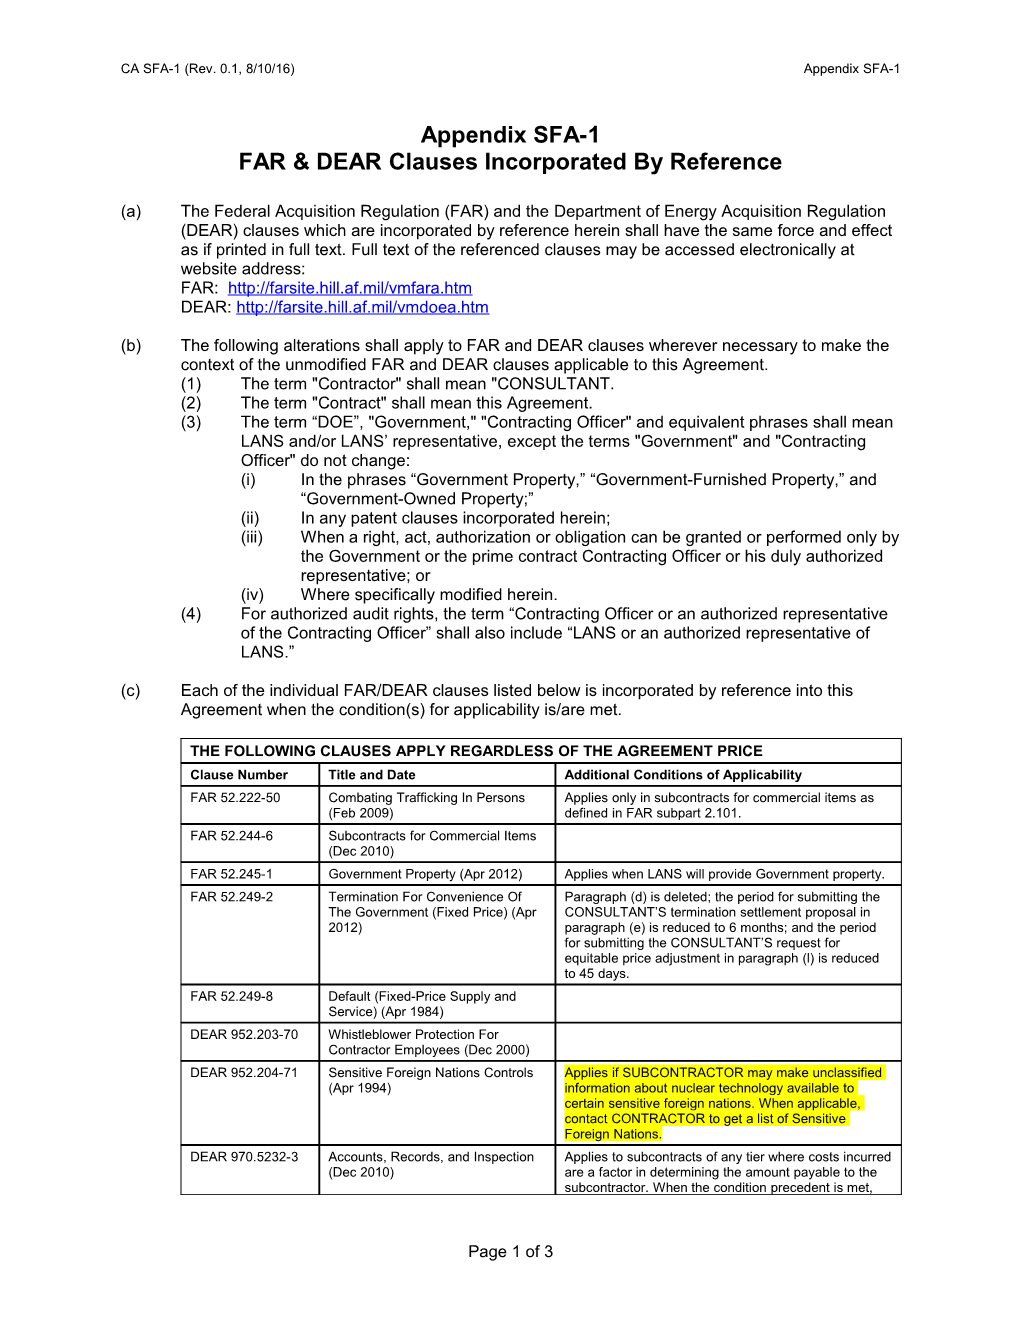 Appendix SFA-1 FAR & DEAR Clauses Incorporated by Reference